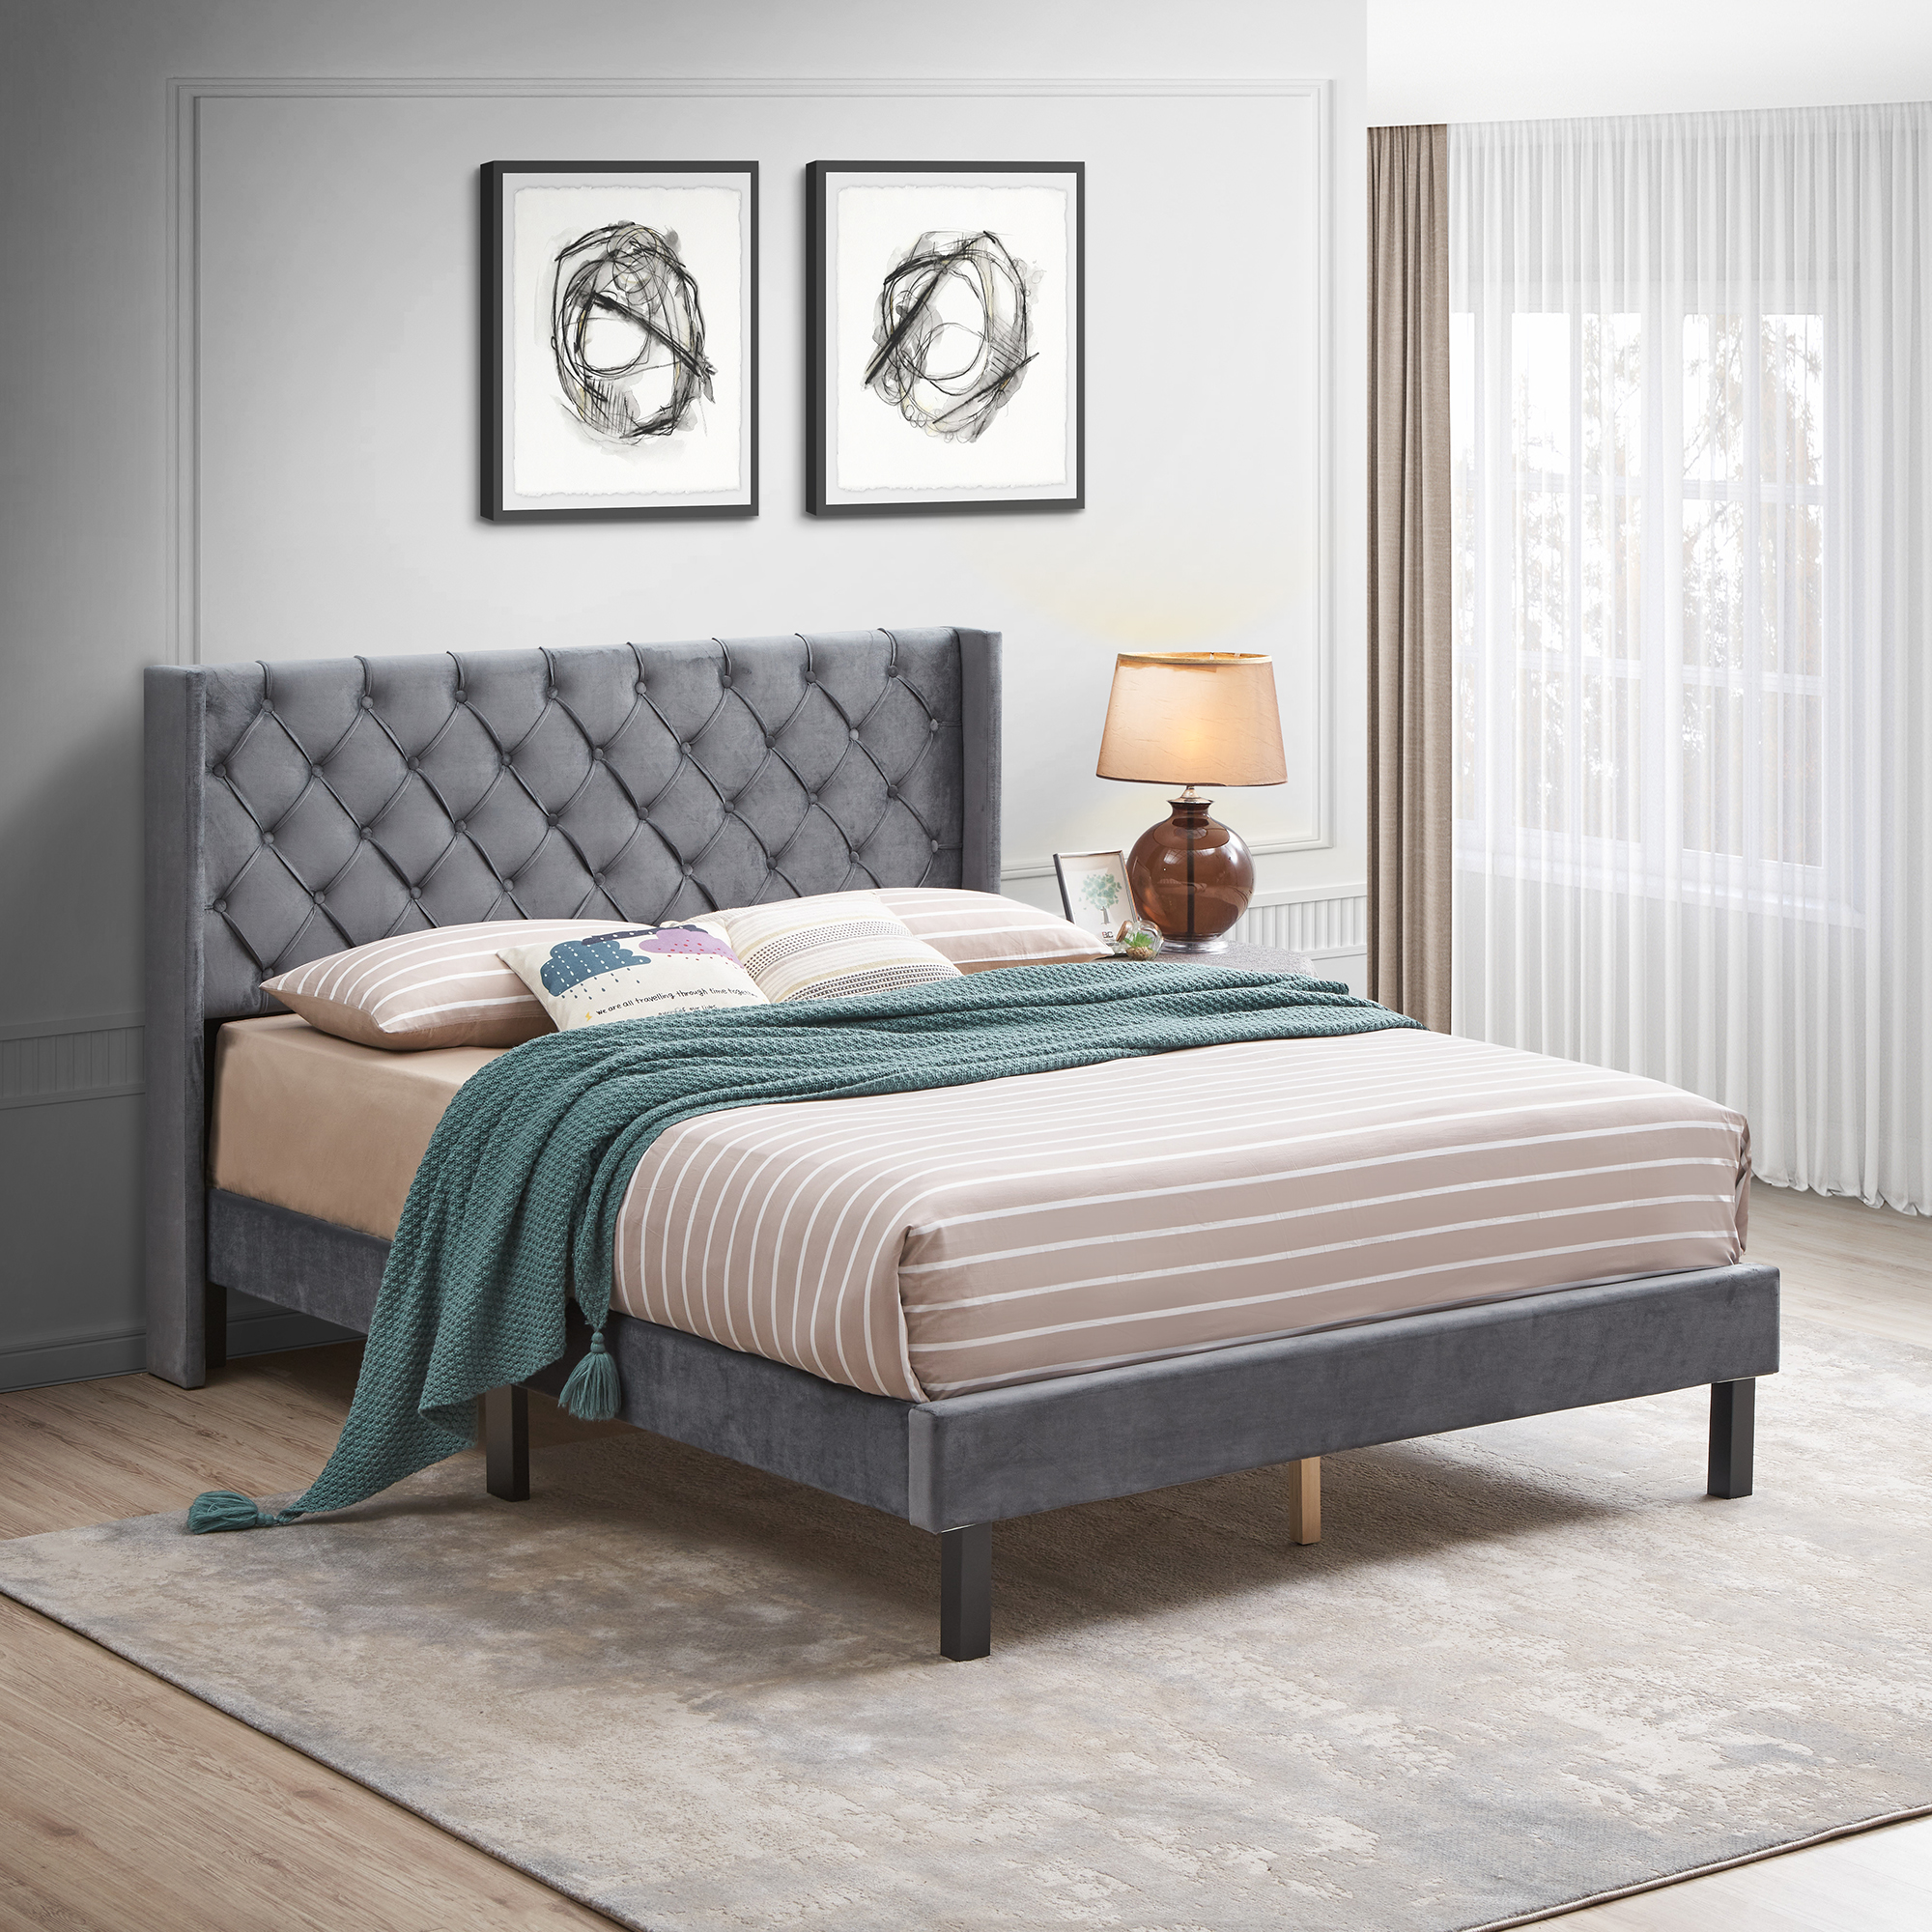 Velvet Button Tufted-Upholstered Bed with Wings Design - Strong Wood Slat Support&nbsp;- Easy Assembly - Gray, Queen, platform bed-Boyel Living